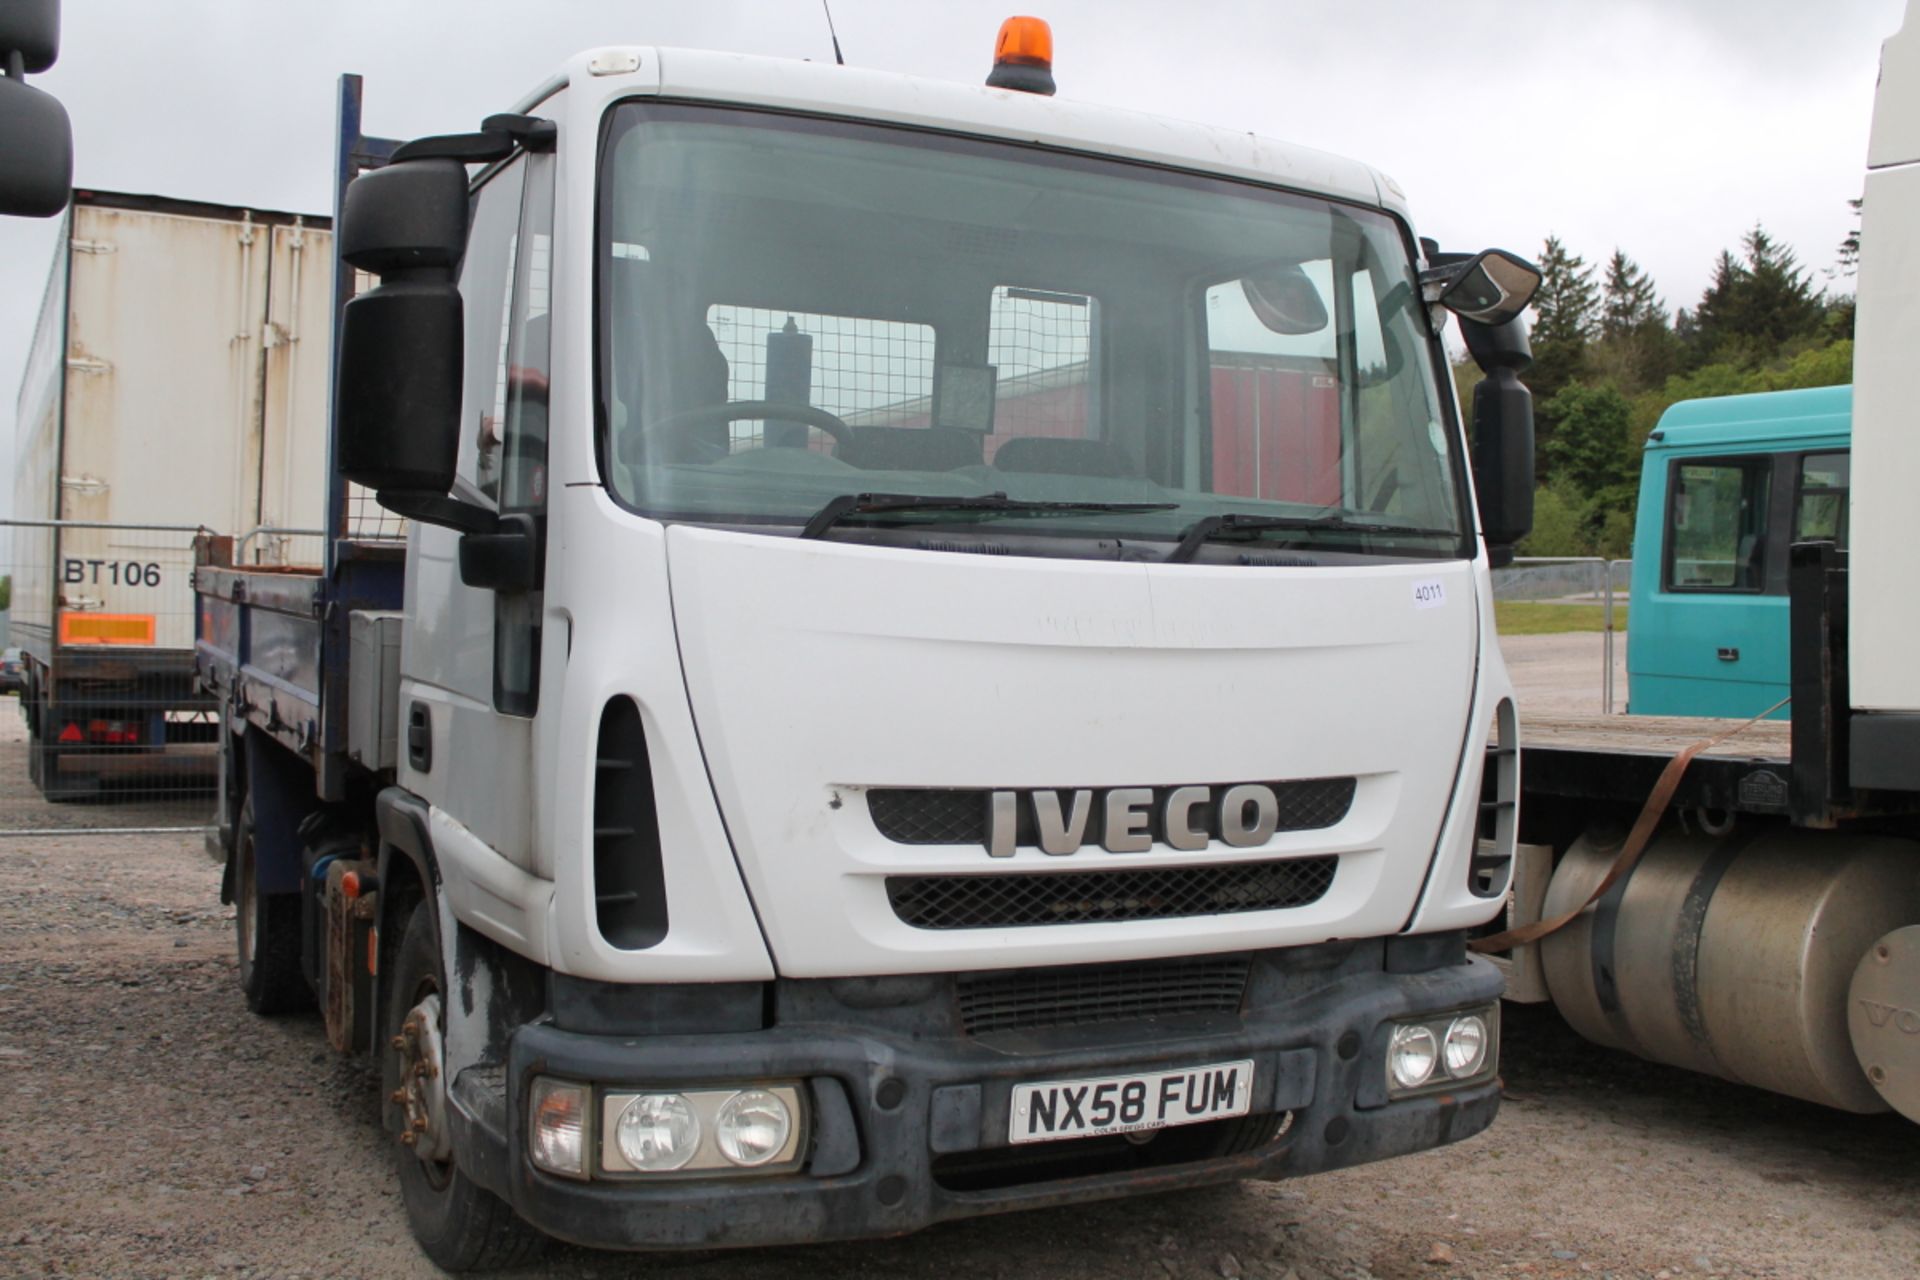 Iveco Eurocargo 75e16s - 3920cc X - Other - Image 2 of 2